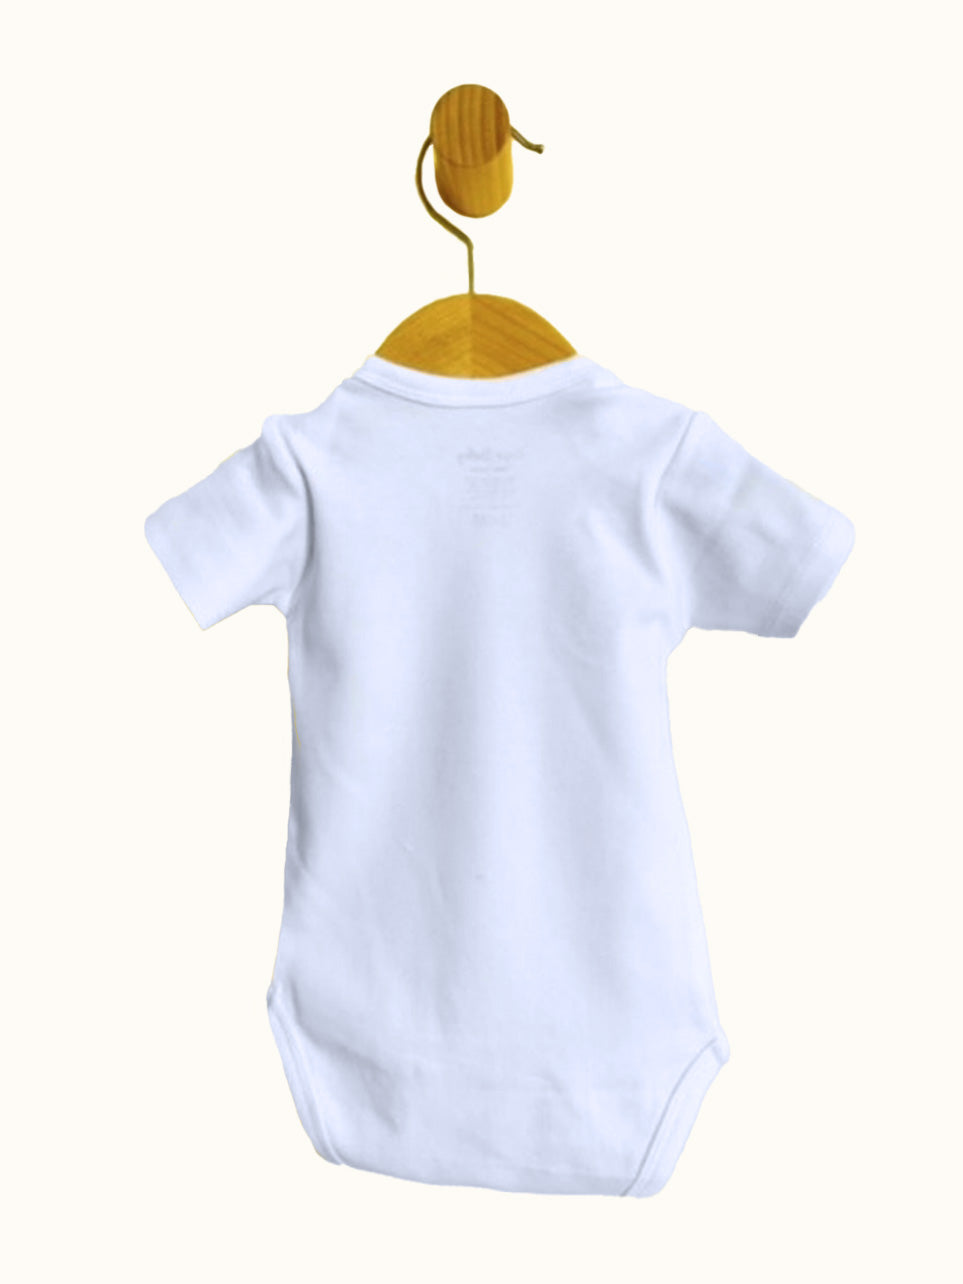 Back view of white short sleeve all natural organic fabric Baby Bodysuit with pacifier strap